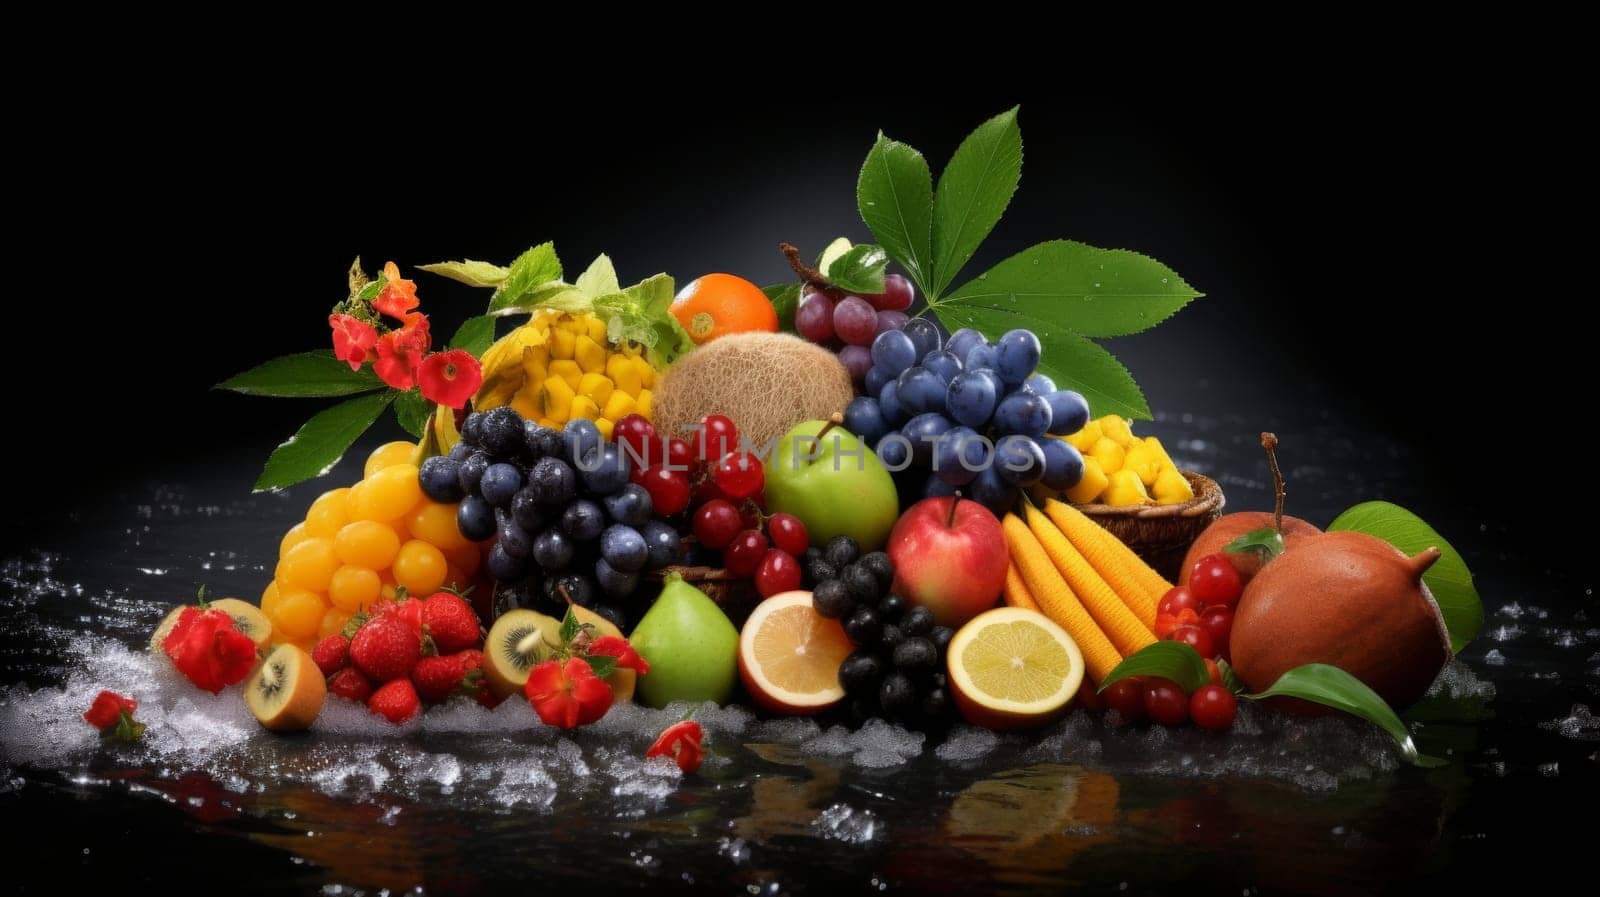 Colorful fruits scattered along the path capture the essence of nature's bounty with a dynamic composition. by Hil